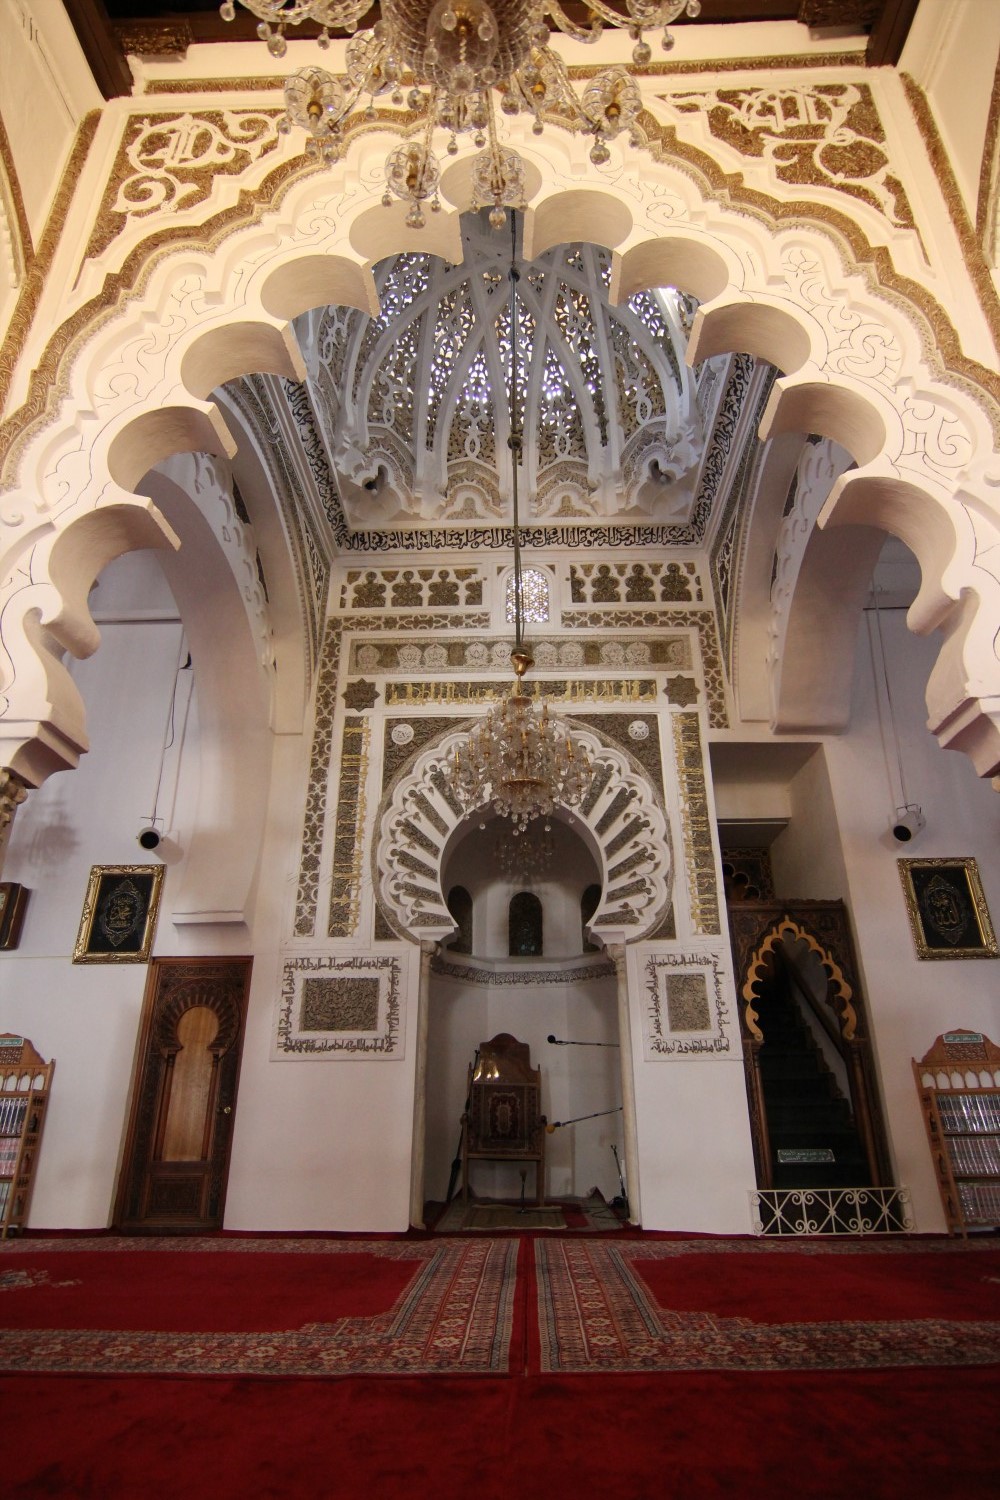 Frontal view of the mihrab showing the mihrab niche and dome